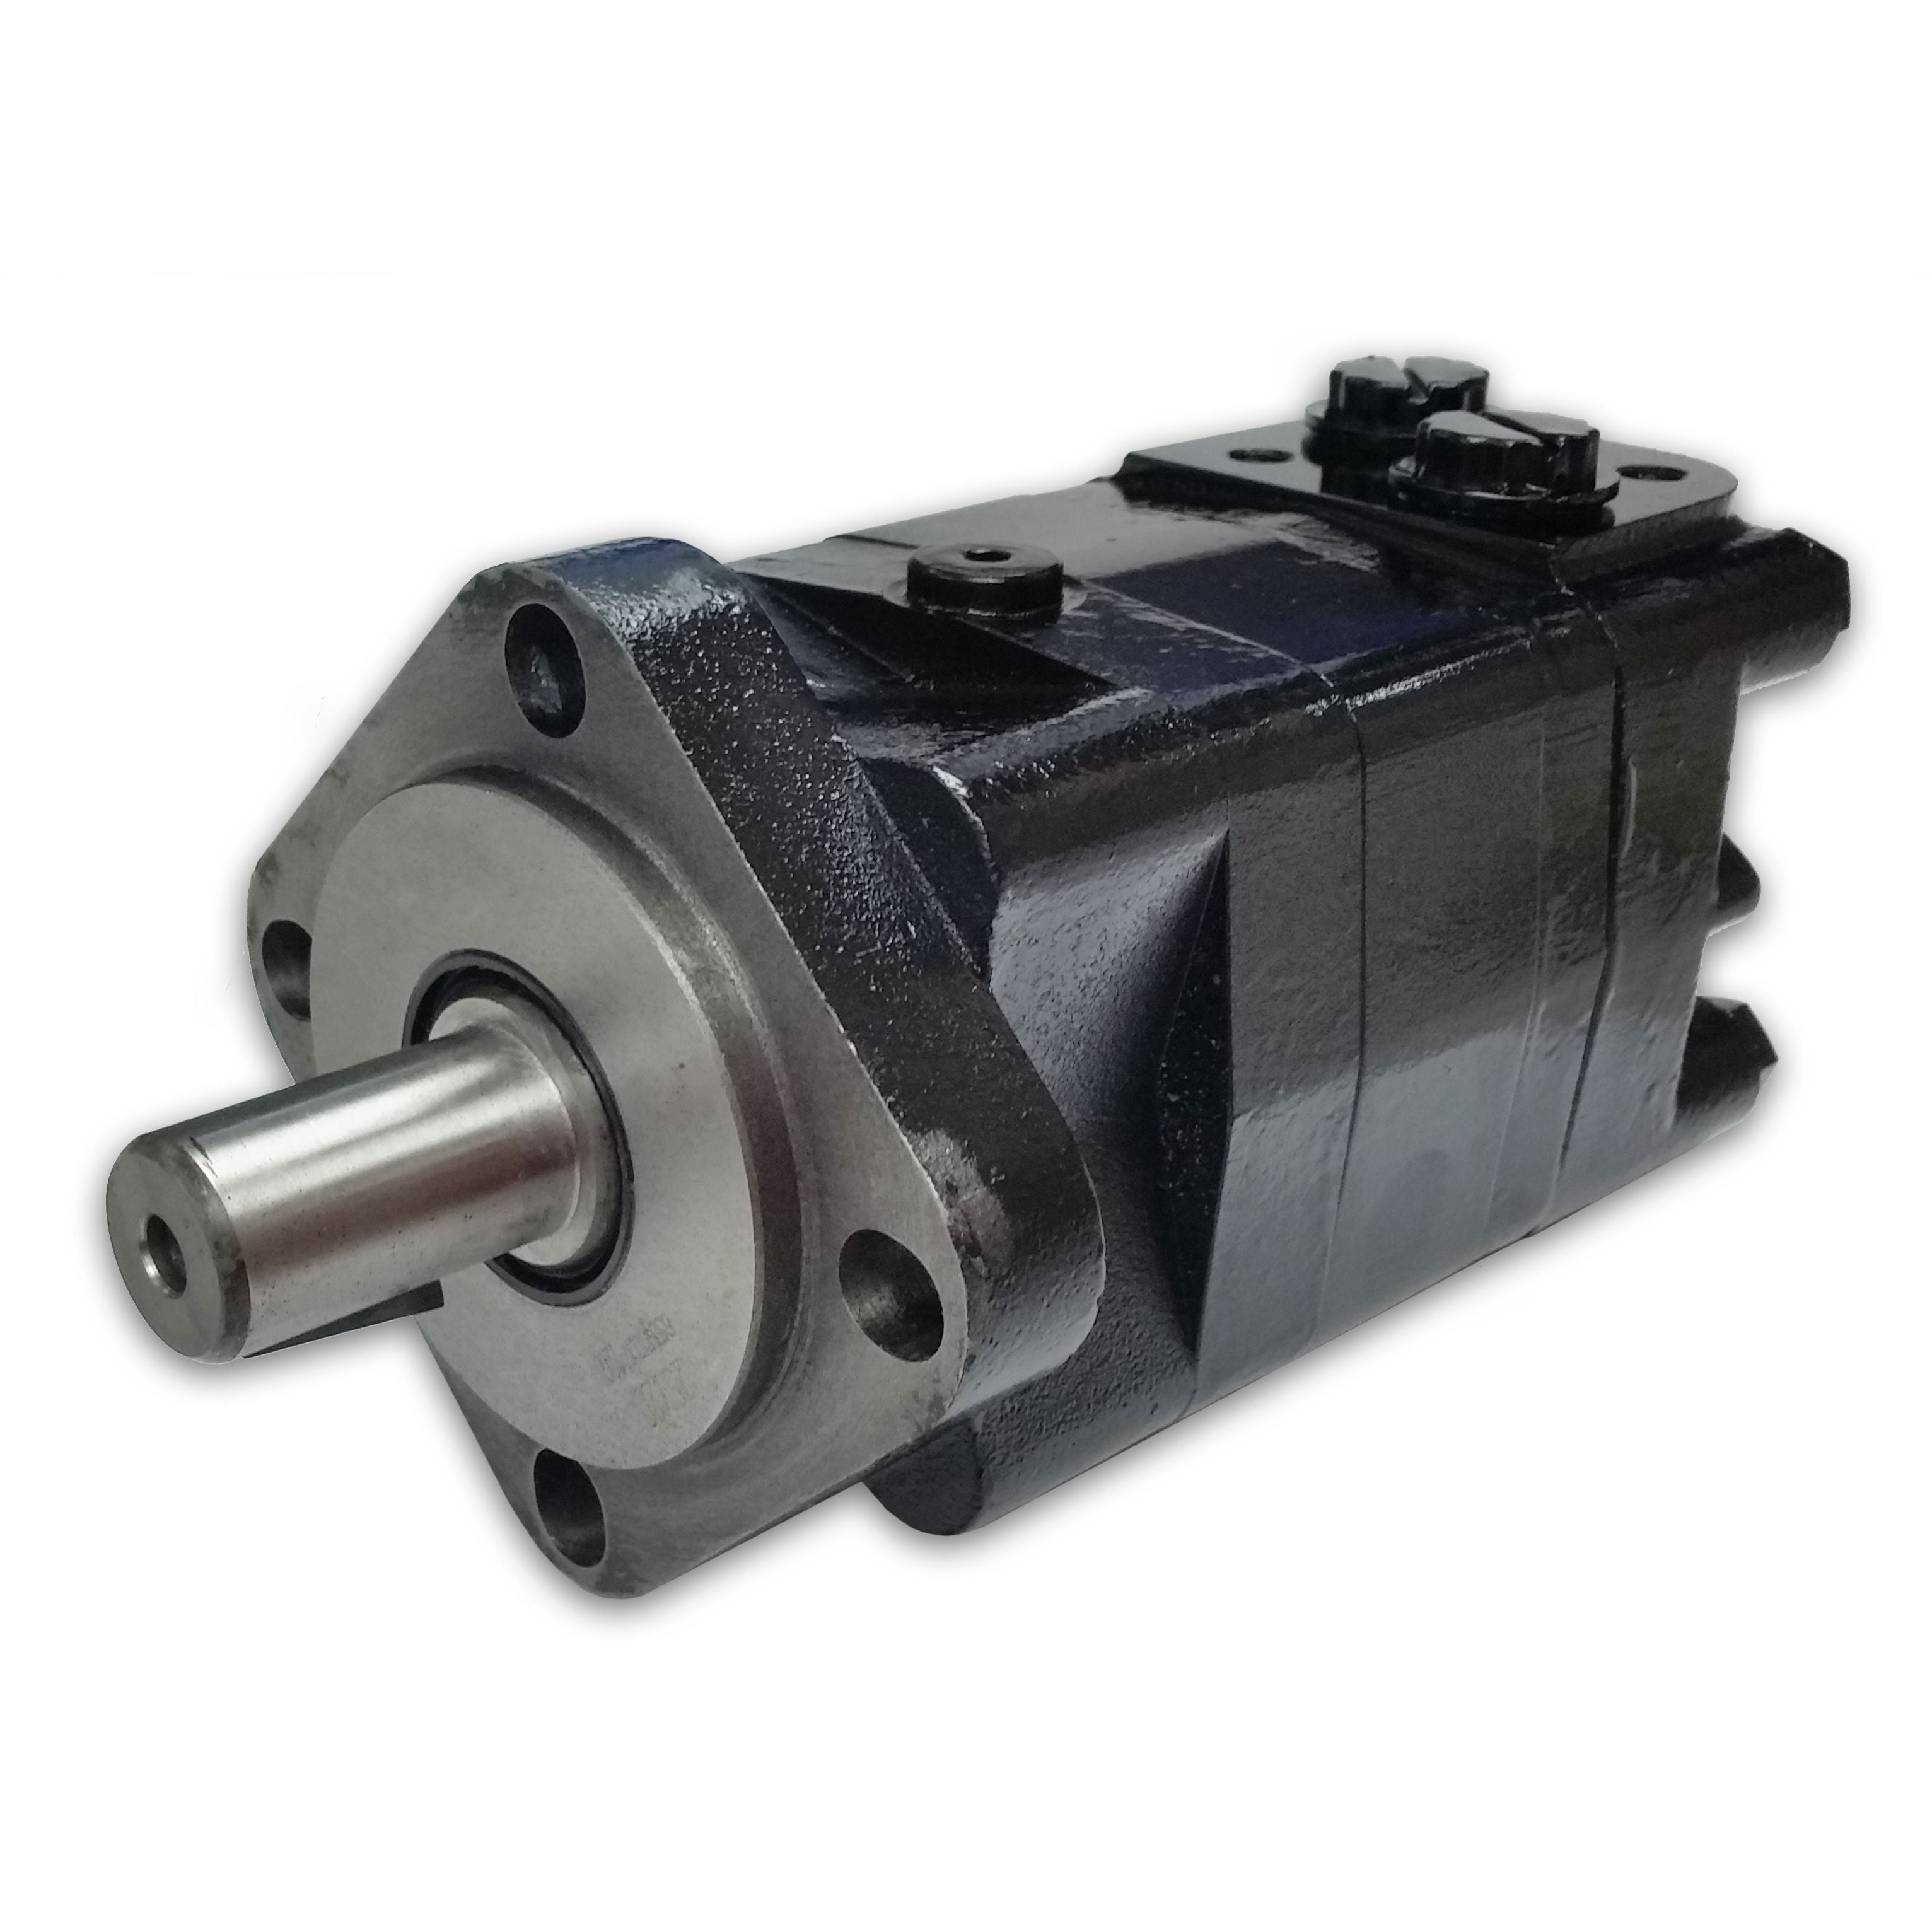 BMSY-475-E4-K-S : Dynamic LSHT Motor, 475cc, 155RPM, 8053in-lb, 2030psi Differential, 19.81GPM, SAE A 4-Bolt Mount, 1" Bore x 1/4" Key Shaft, Side Ported, #10 SAE (5/8")